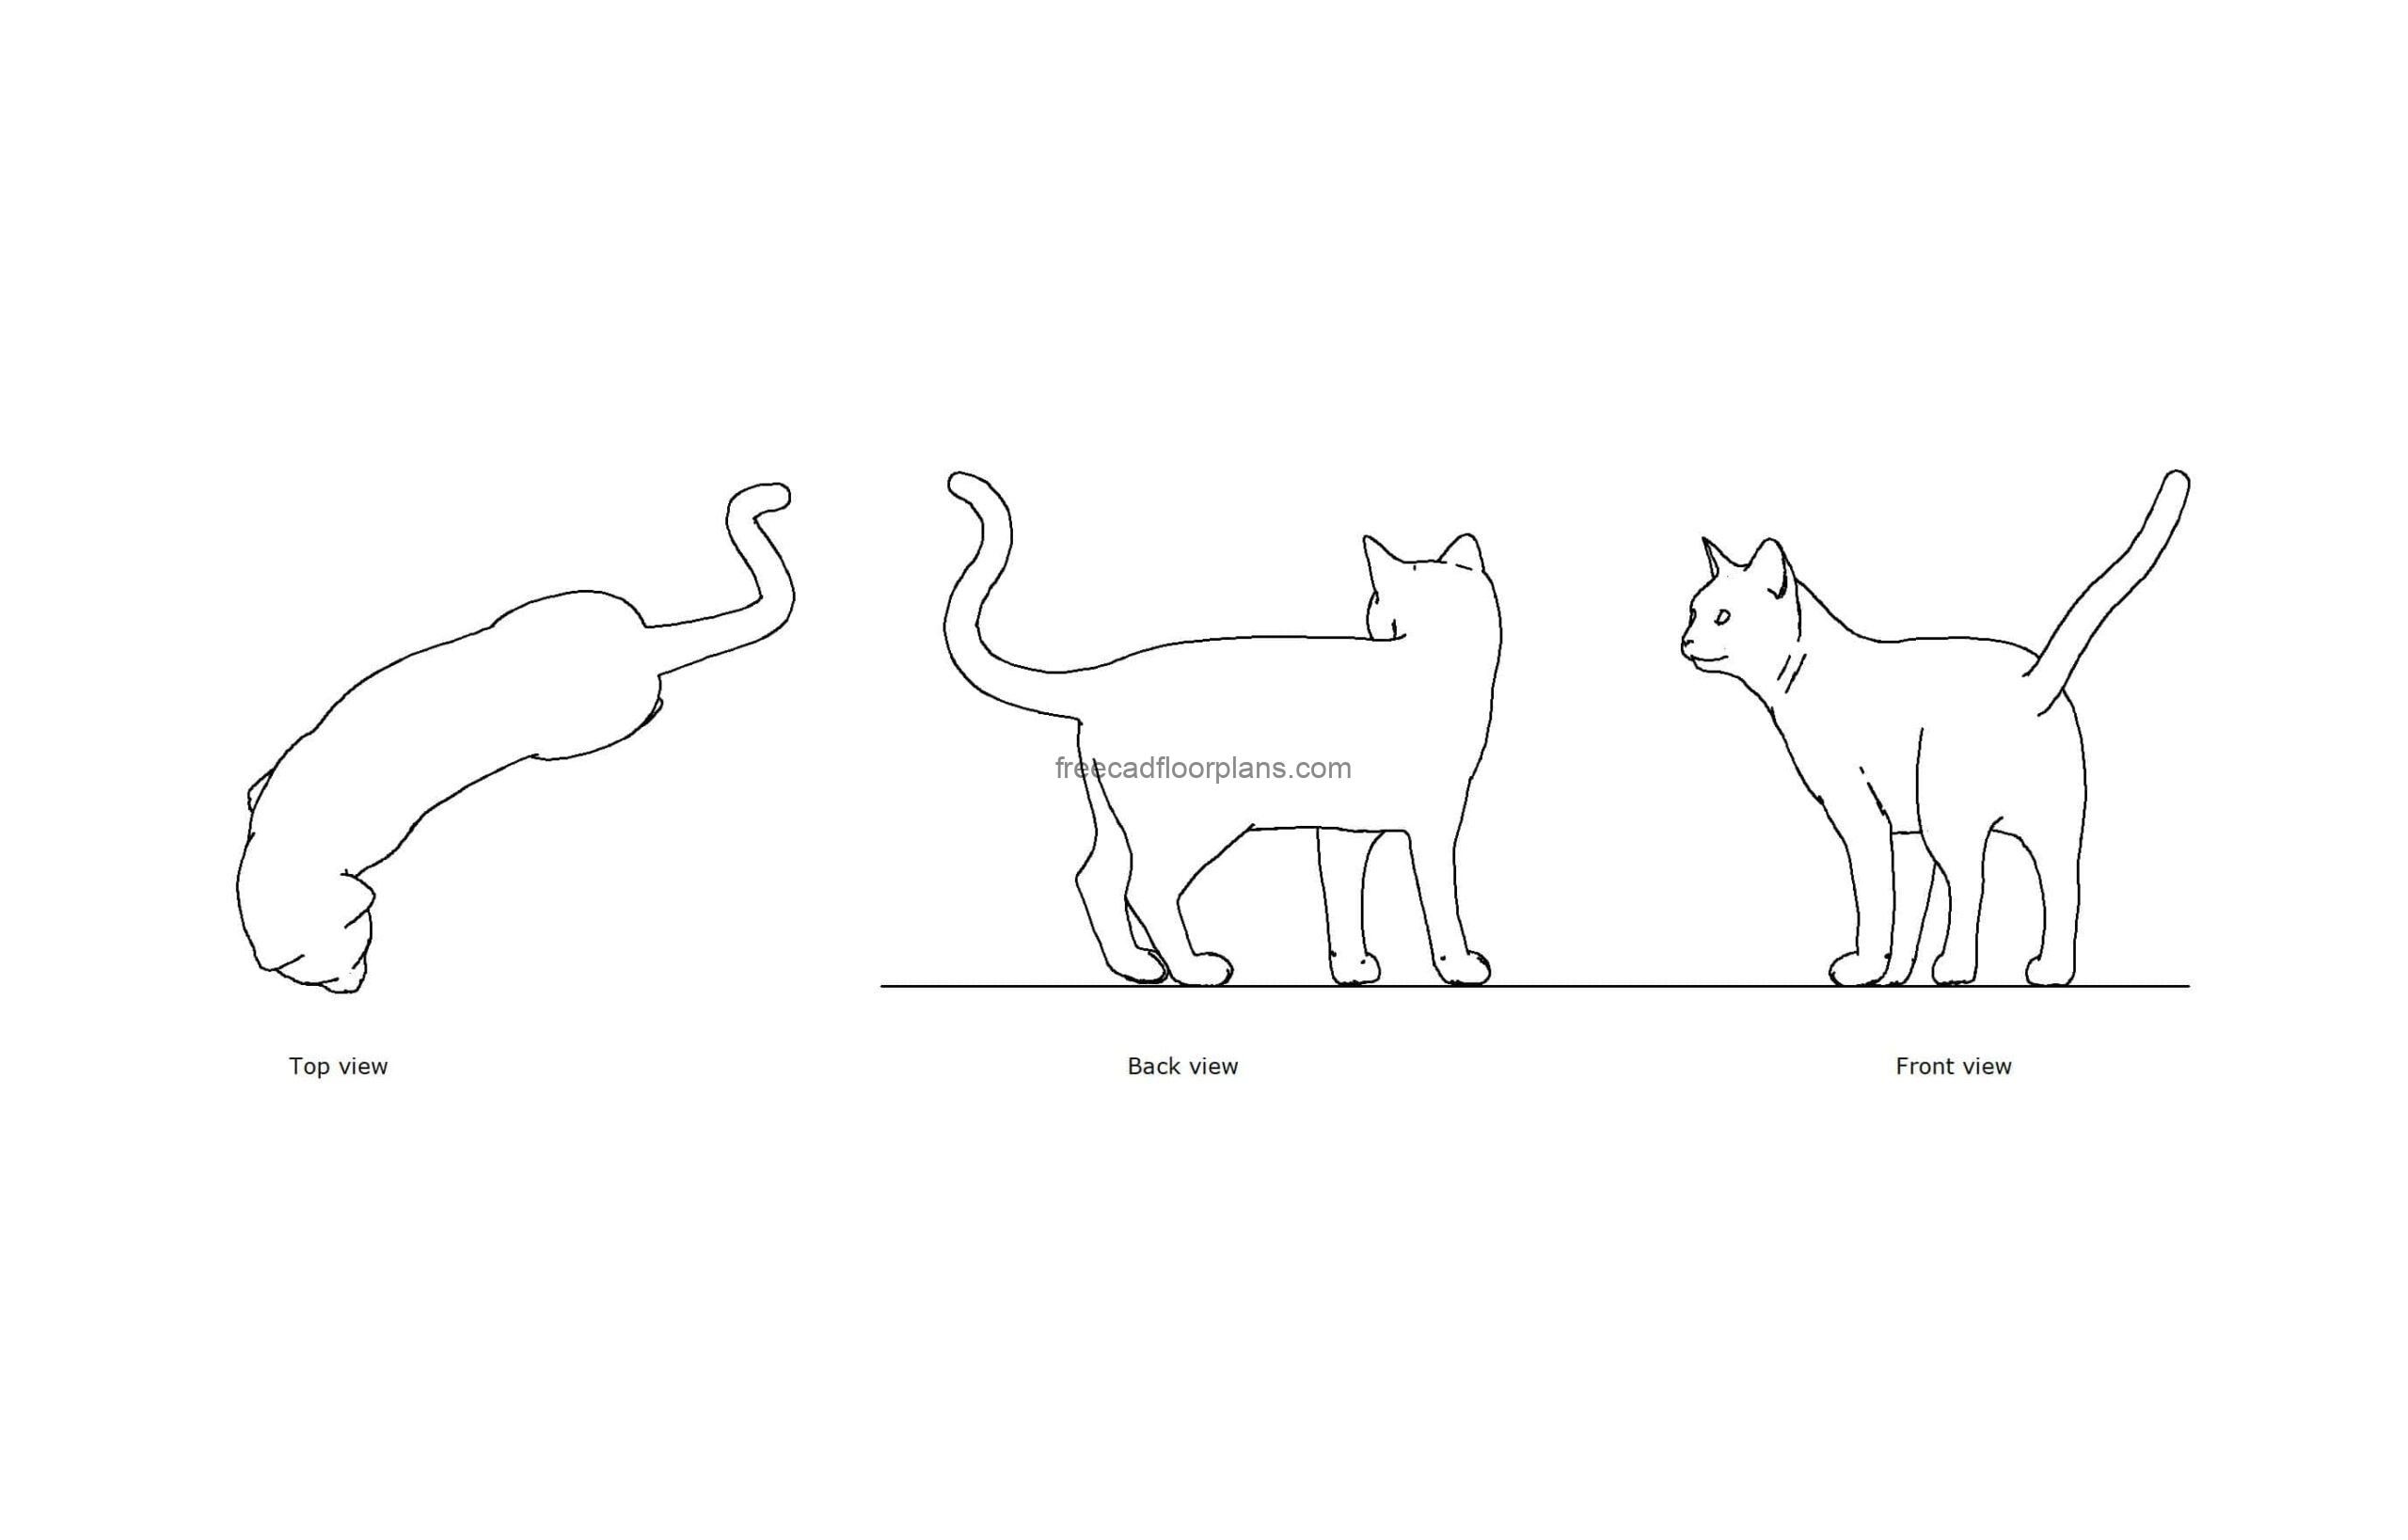 autocad 2d drawing of a cat, plan and elevation views, dwg file free for download